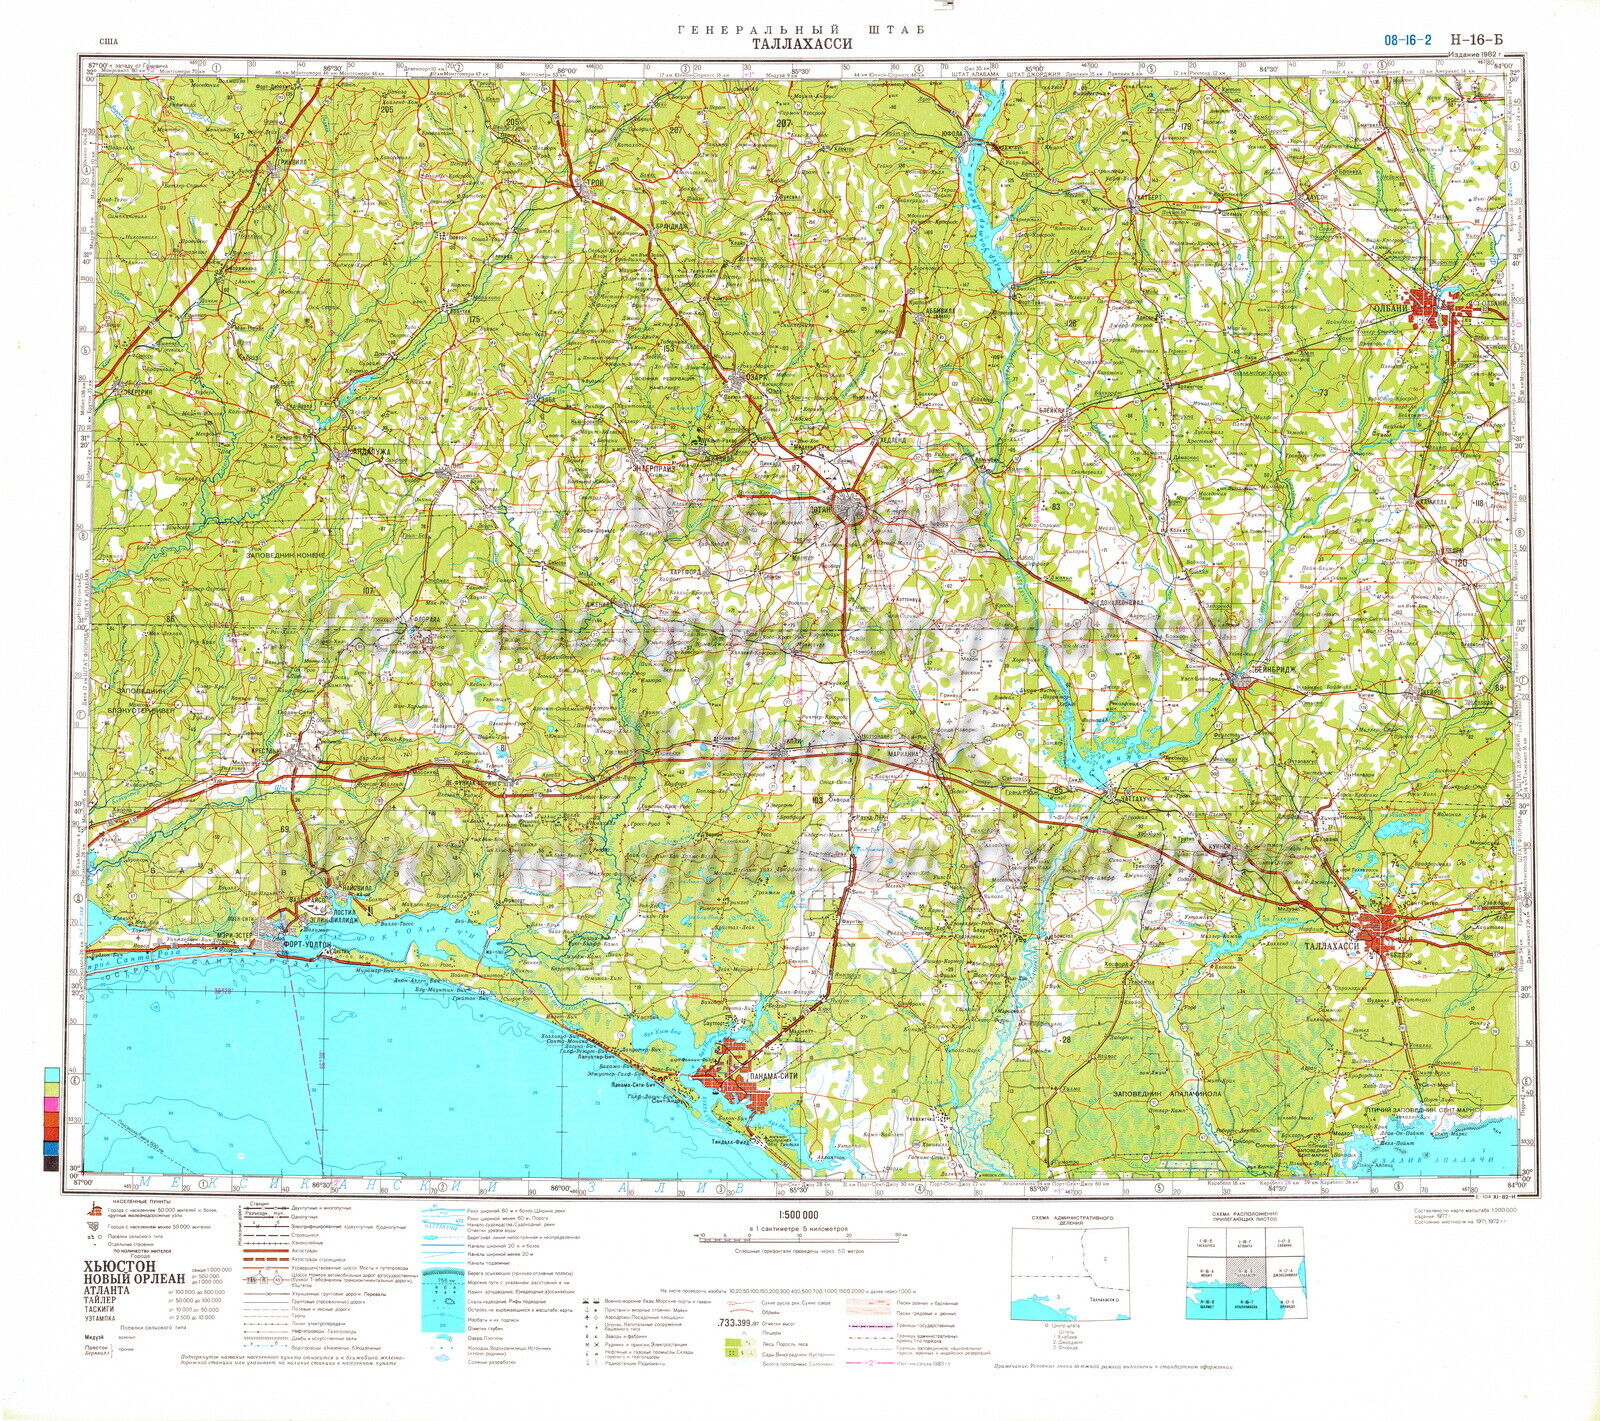 Soviet Russian Topographic Map TALLAHASSEE, FLORIDA USA 1:500K Ed.1982 POSTER